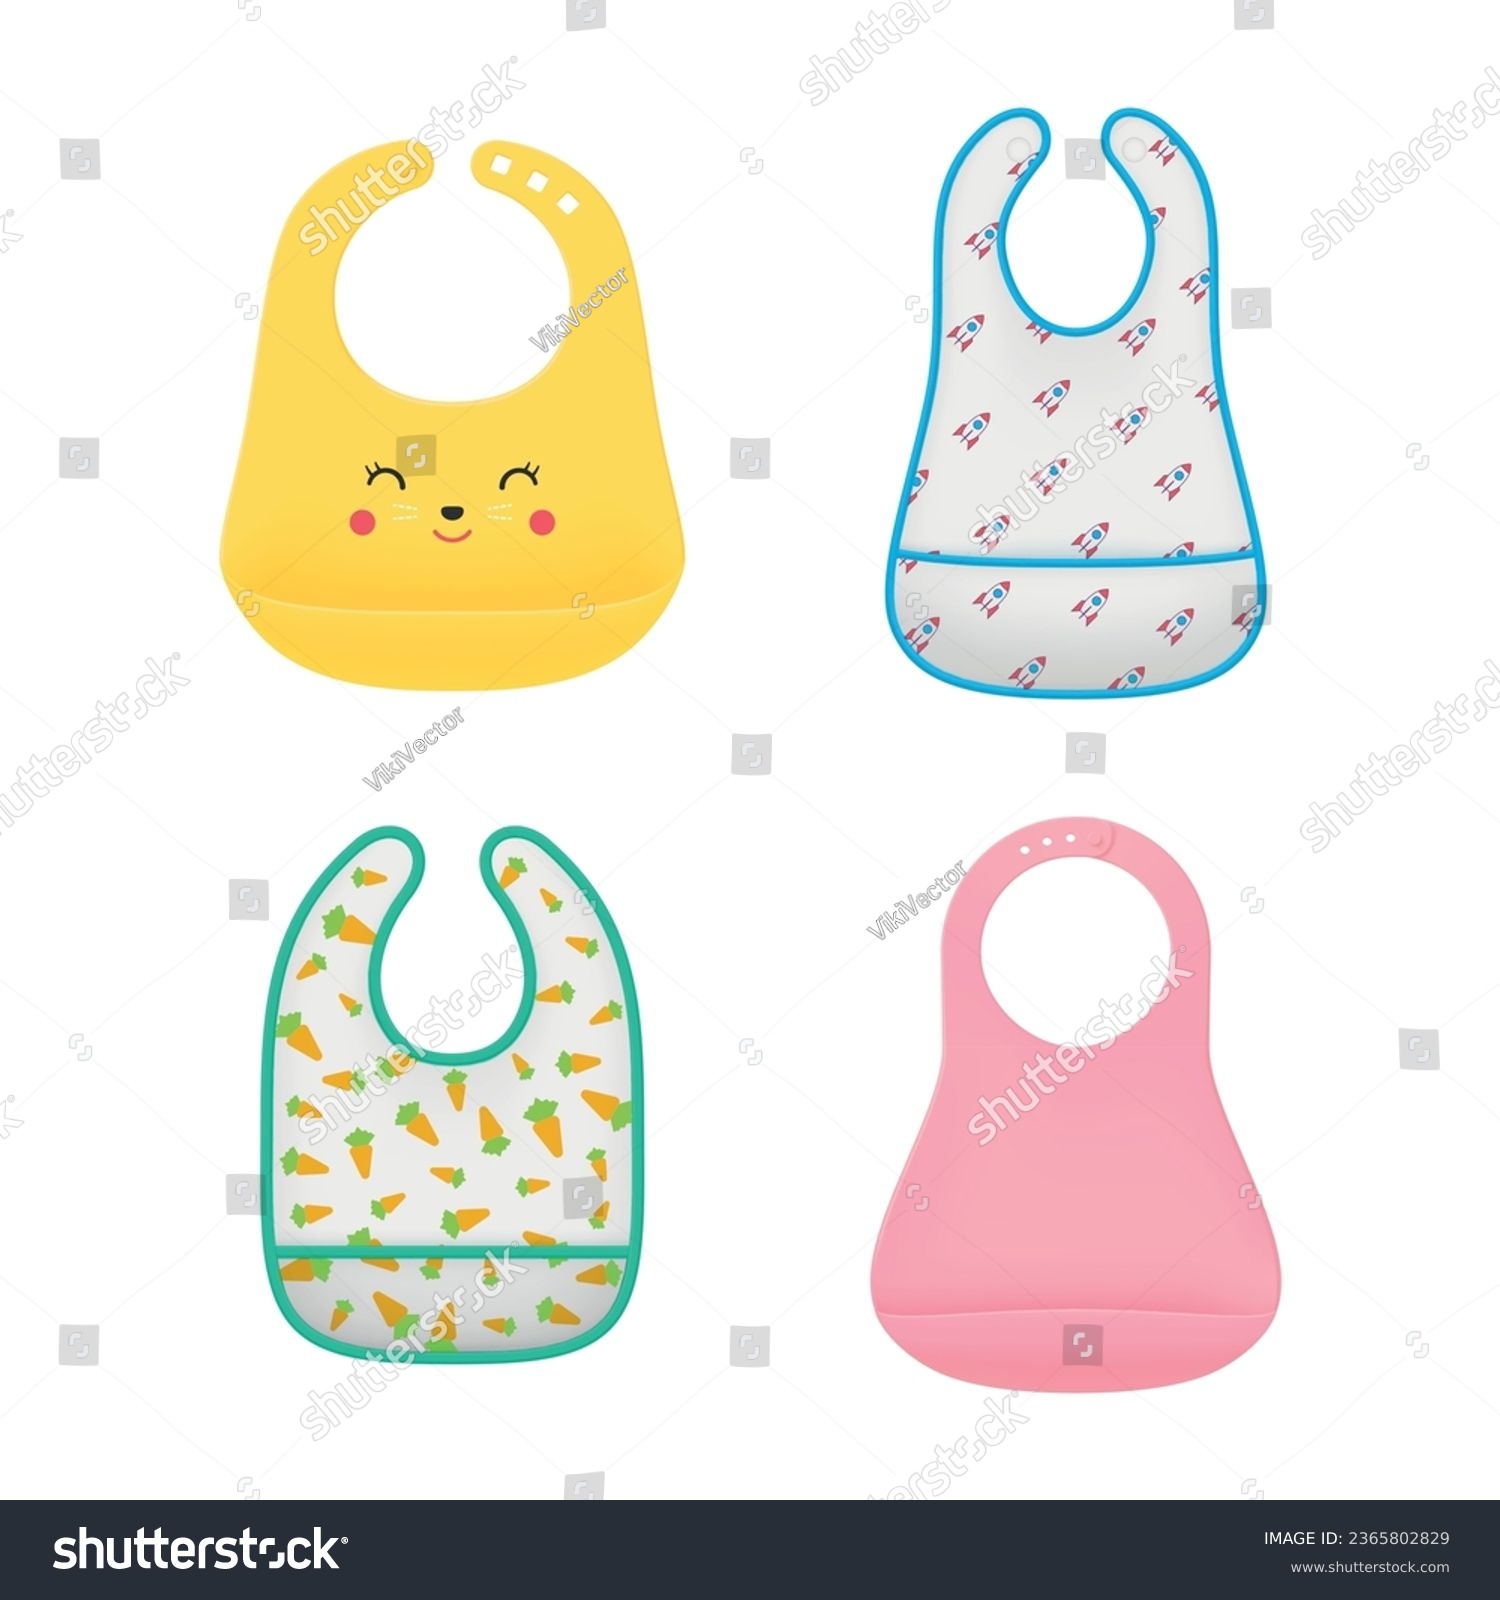 SVG of Baby bib plastic and textile protective newborn clothes for eating set realistic vector illustration. Childish safety garment for feeding cute design with muzzle character carrot rocket and pink apron svg